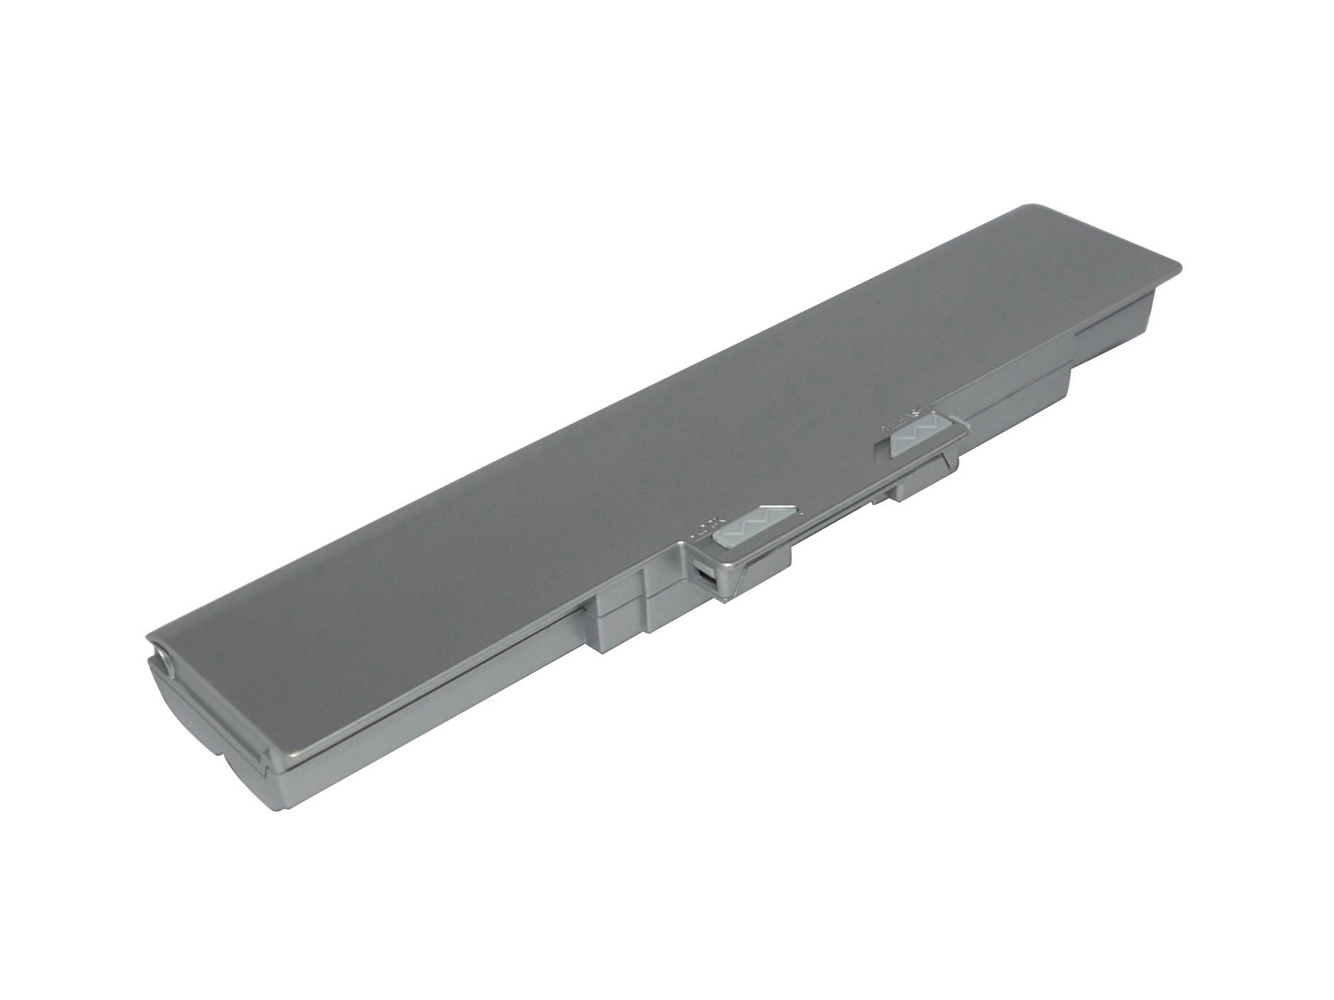 VGP-BPS13/S, VGP-BPS13A/S replacement Laptop Battery for Sony VAIO VPC-S115FG, VAIO VGN-AW53FB, 6 cells, 4600mAh, 11.10V